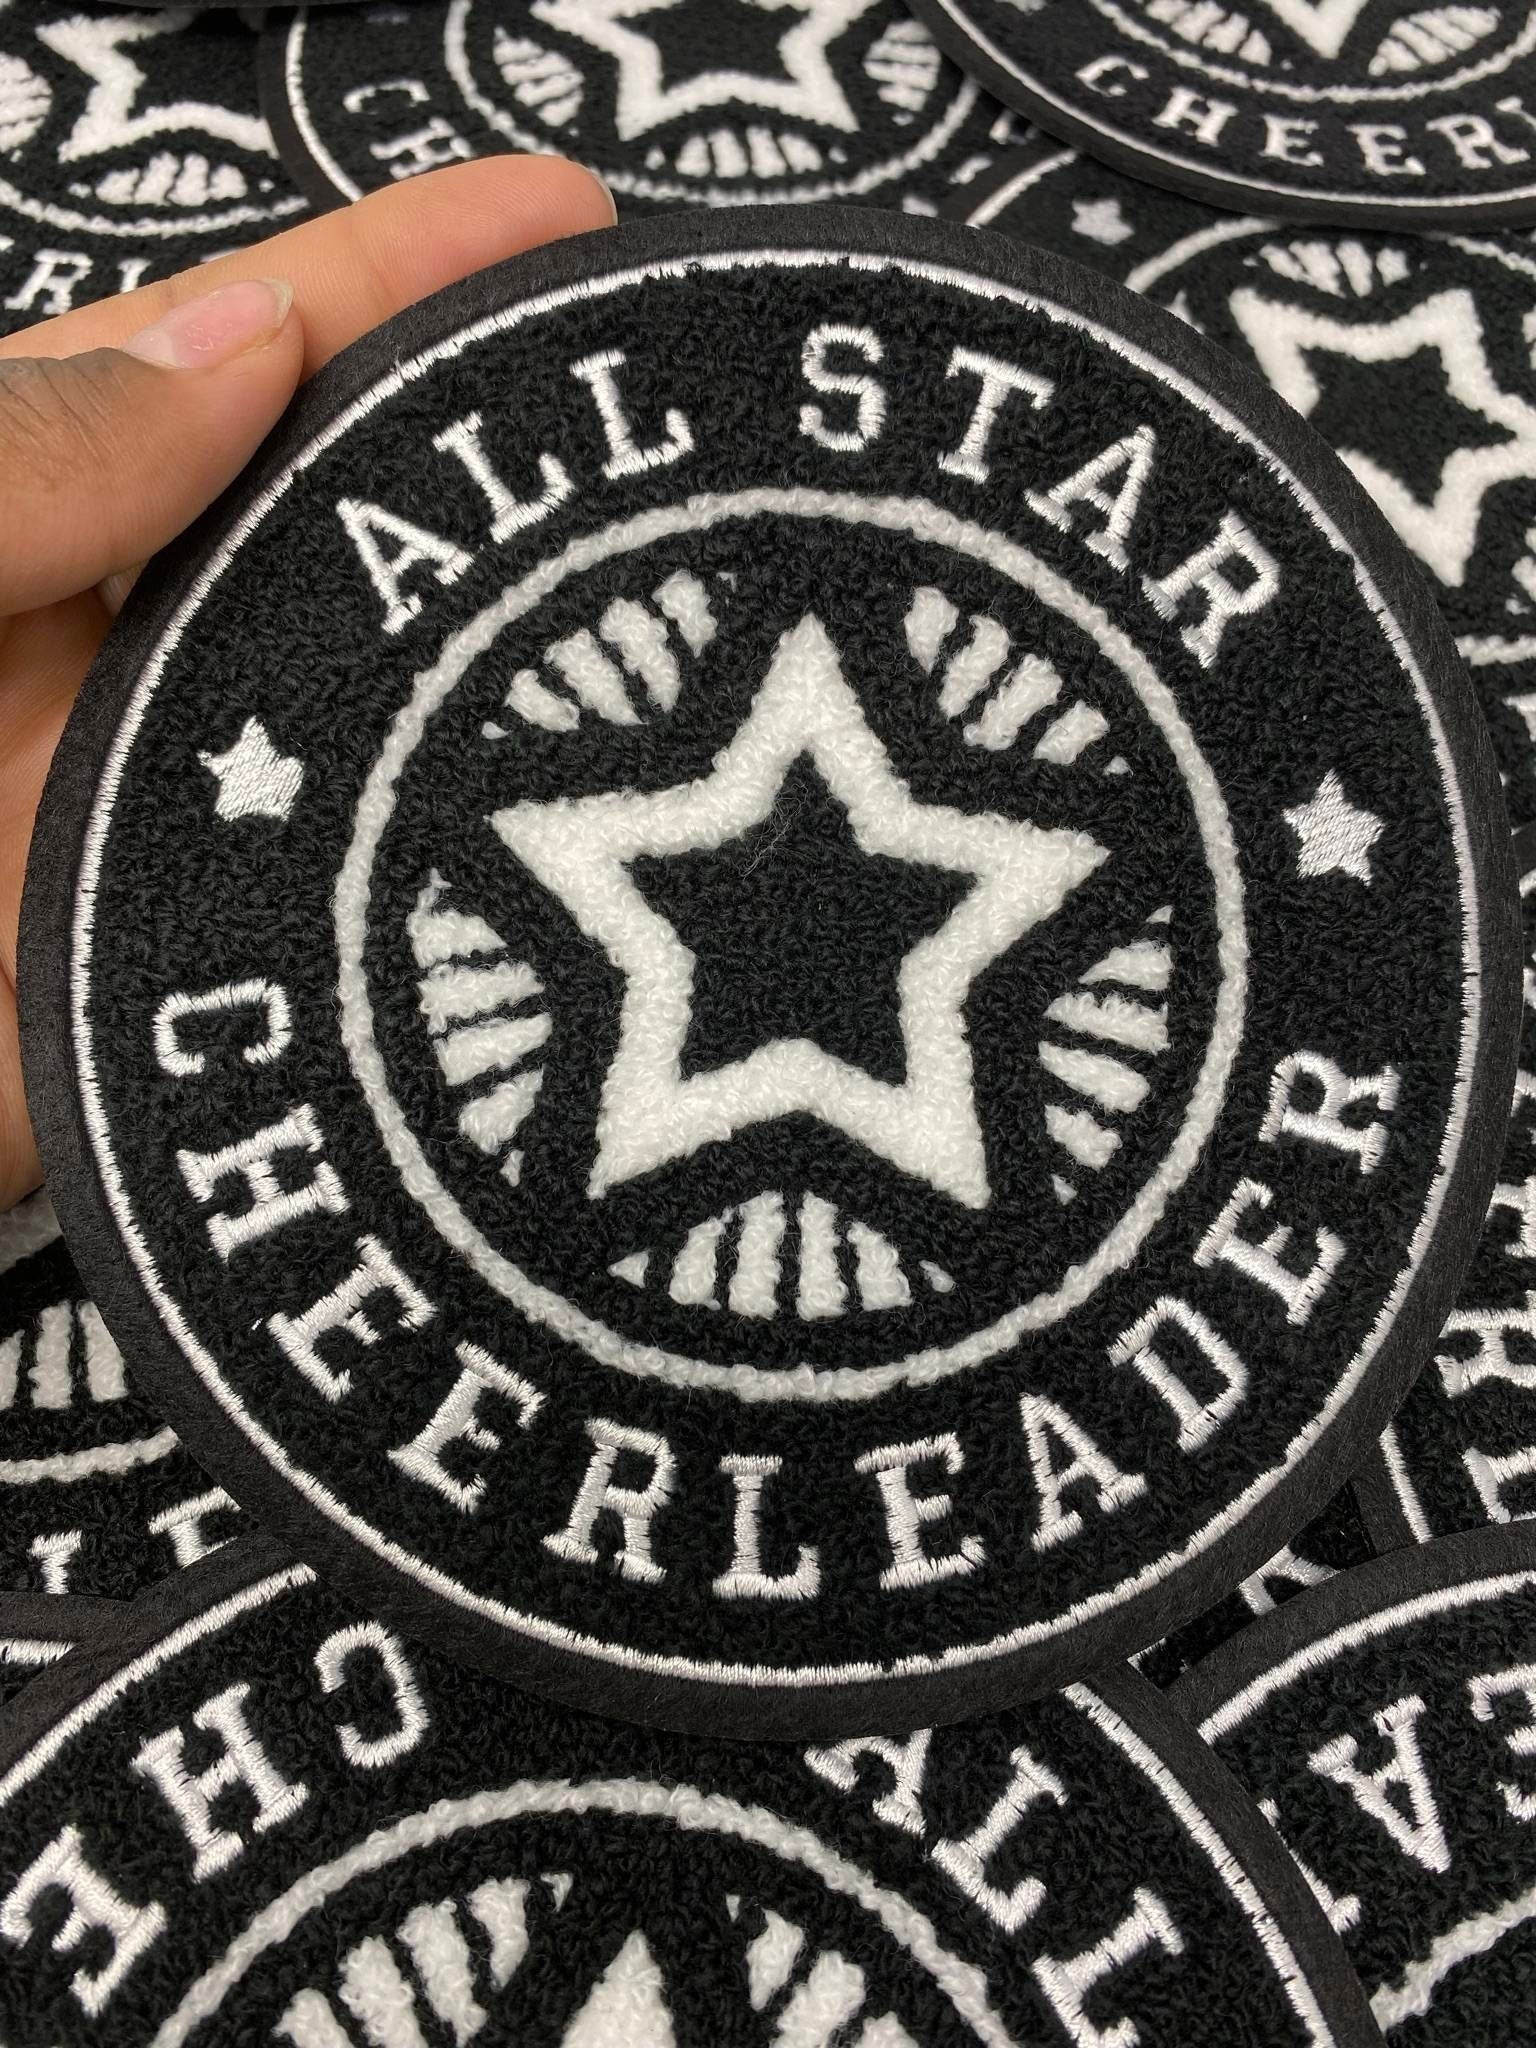 3x Black Star Patches Iron on Patch Iron on Black Star Patches White Star  Iron on Patch Patches for Jackets Iron on Patches 